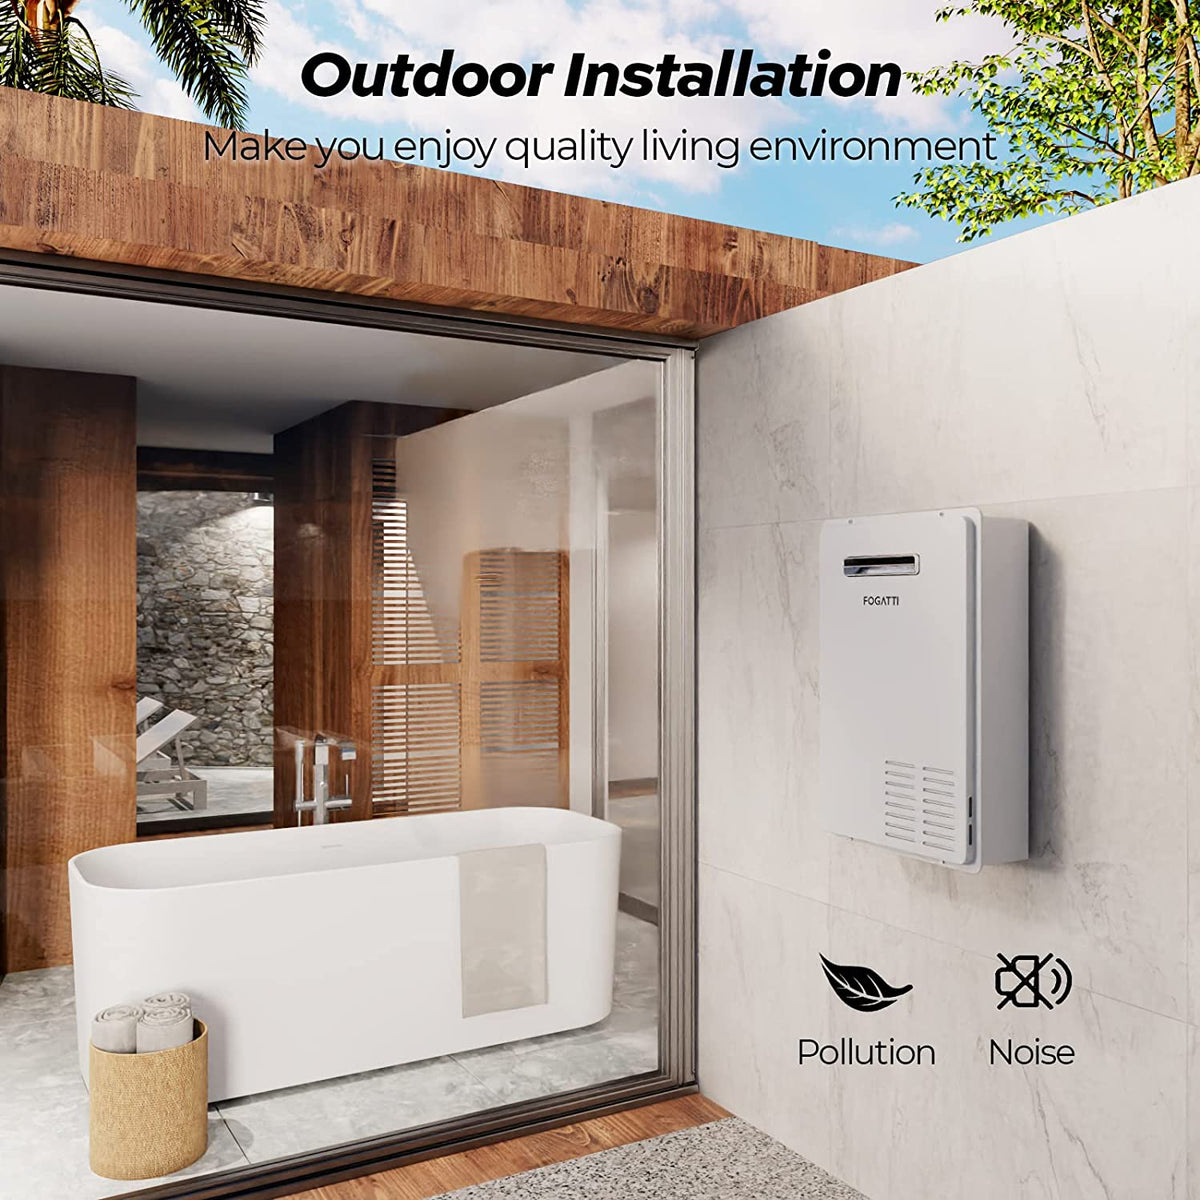 Propane Gas Tankless Water Heater, FOGATTI Outdoor 7.5 GPM, 170,000 BTU White Instant Hot Water Heater, InstaGas Comfort 170S Series